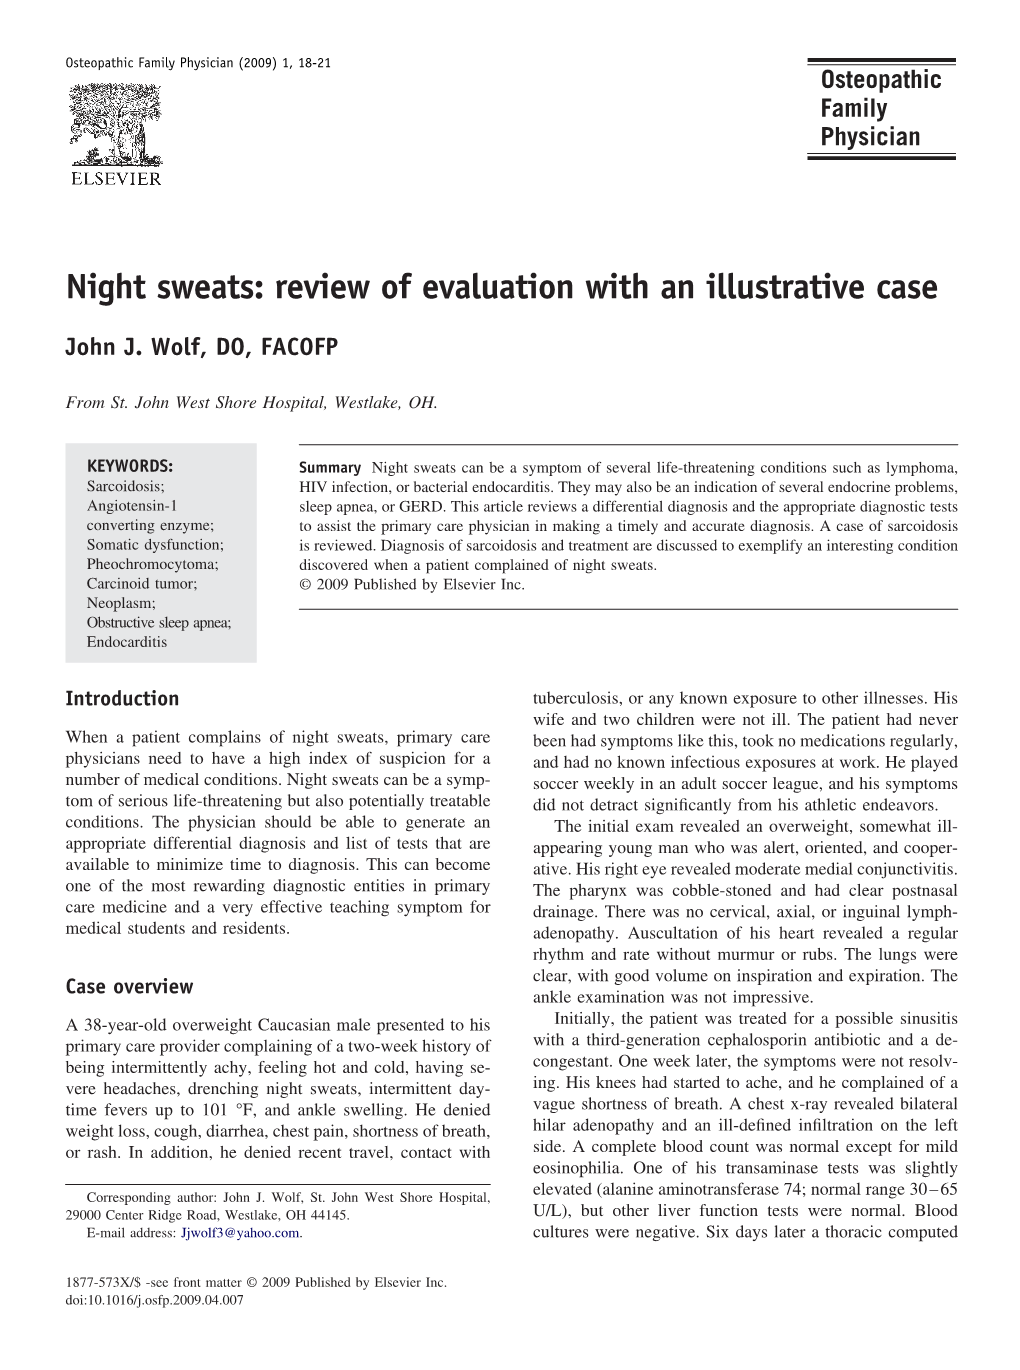 Night Sweats: Review of Evaluation with an Illustrative Case